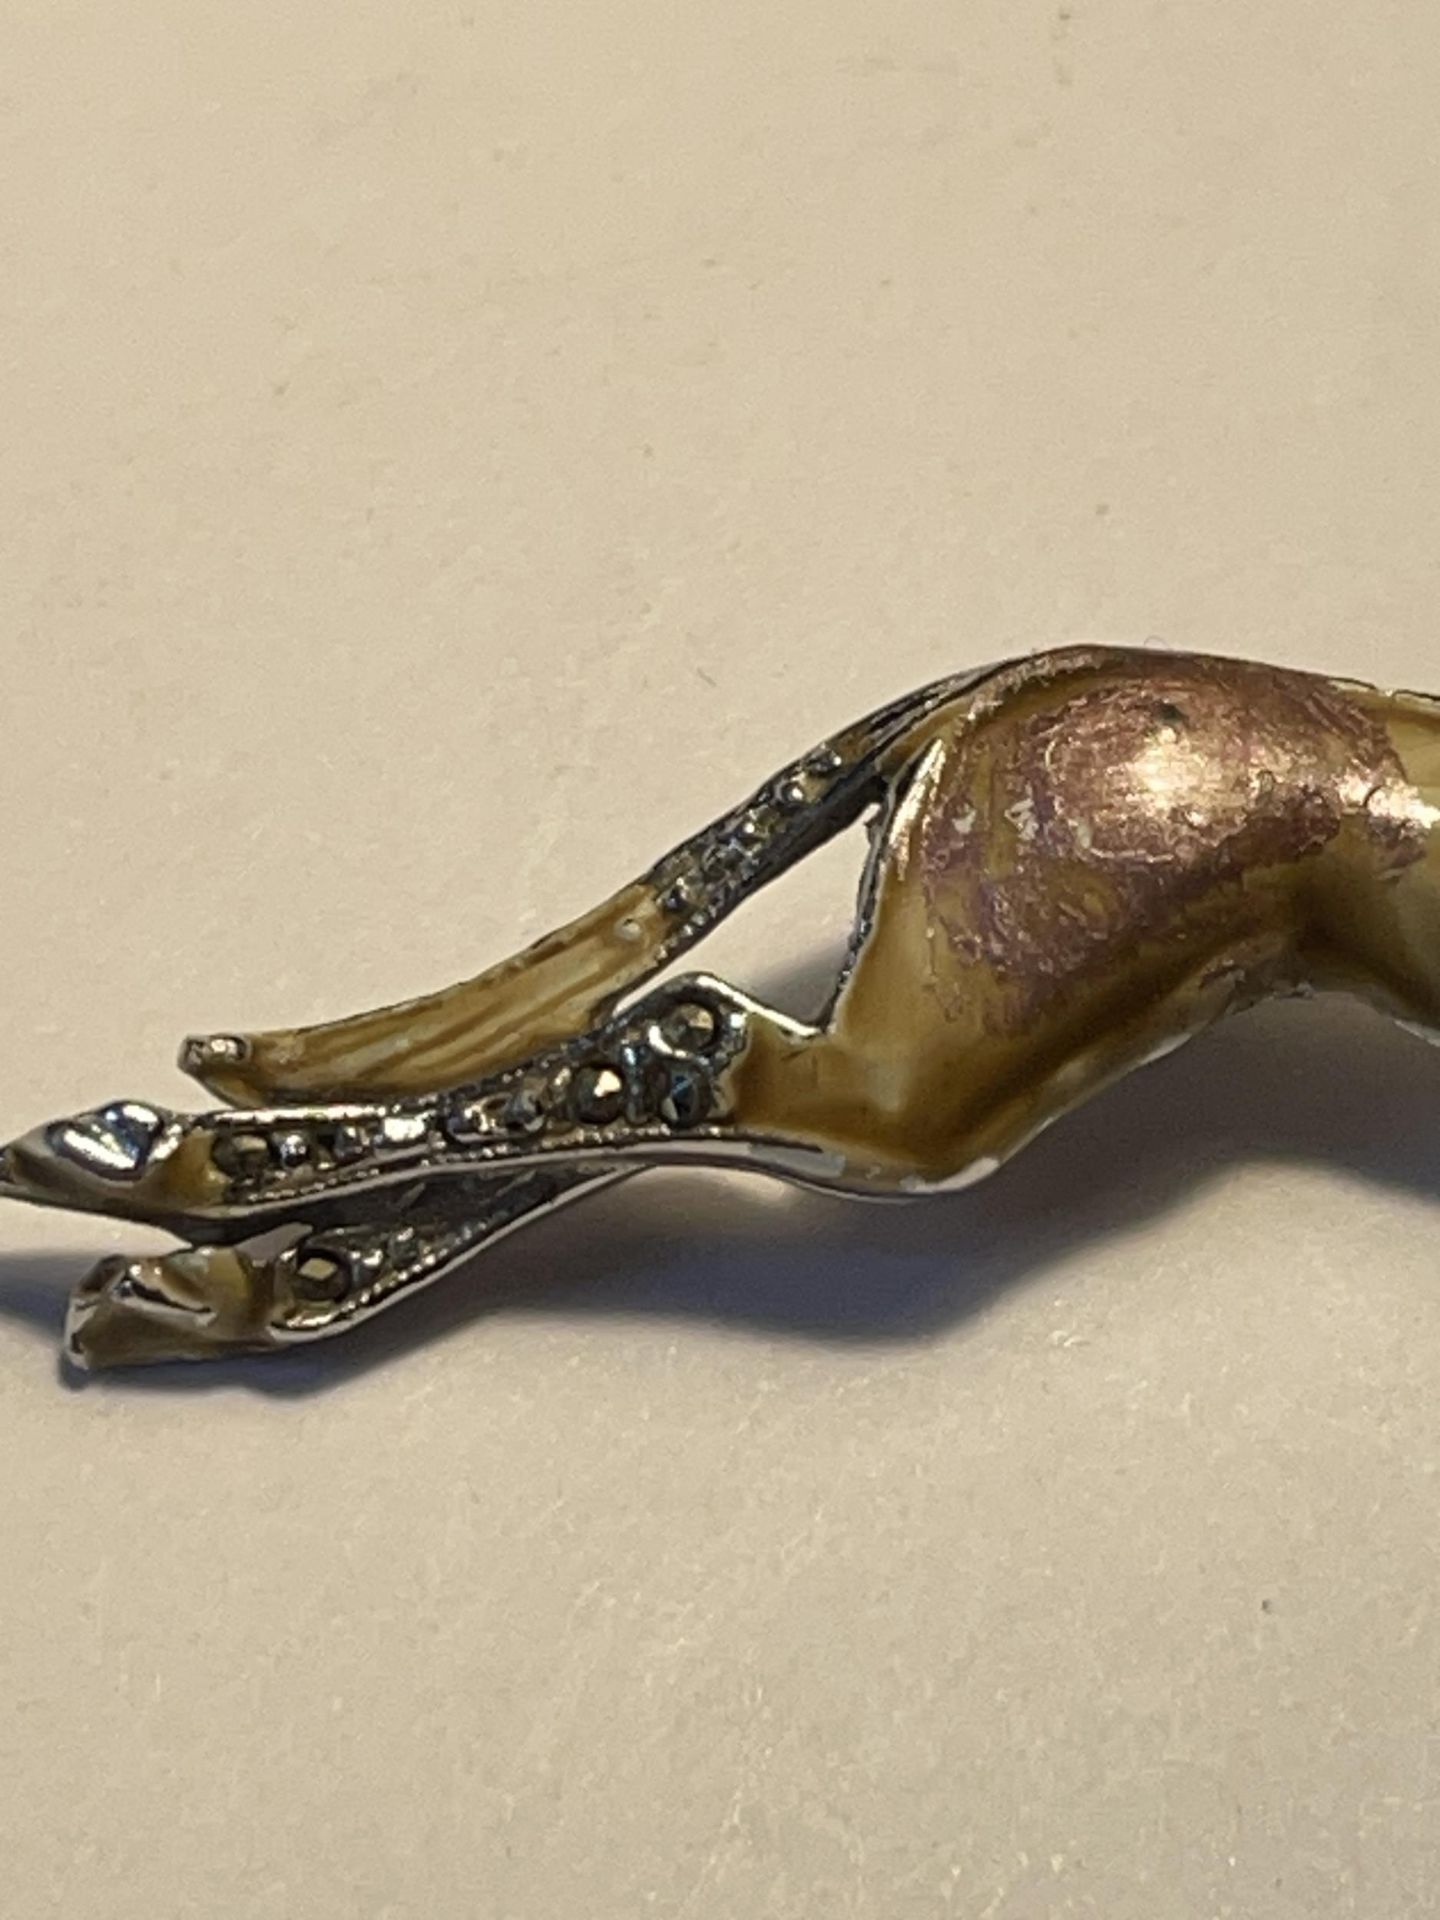 A VINTAGE ENAMELLED GREYHOUND BROOCH WITH A PRESENTATION BOX - Image 4 of 5